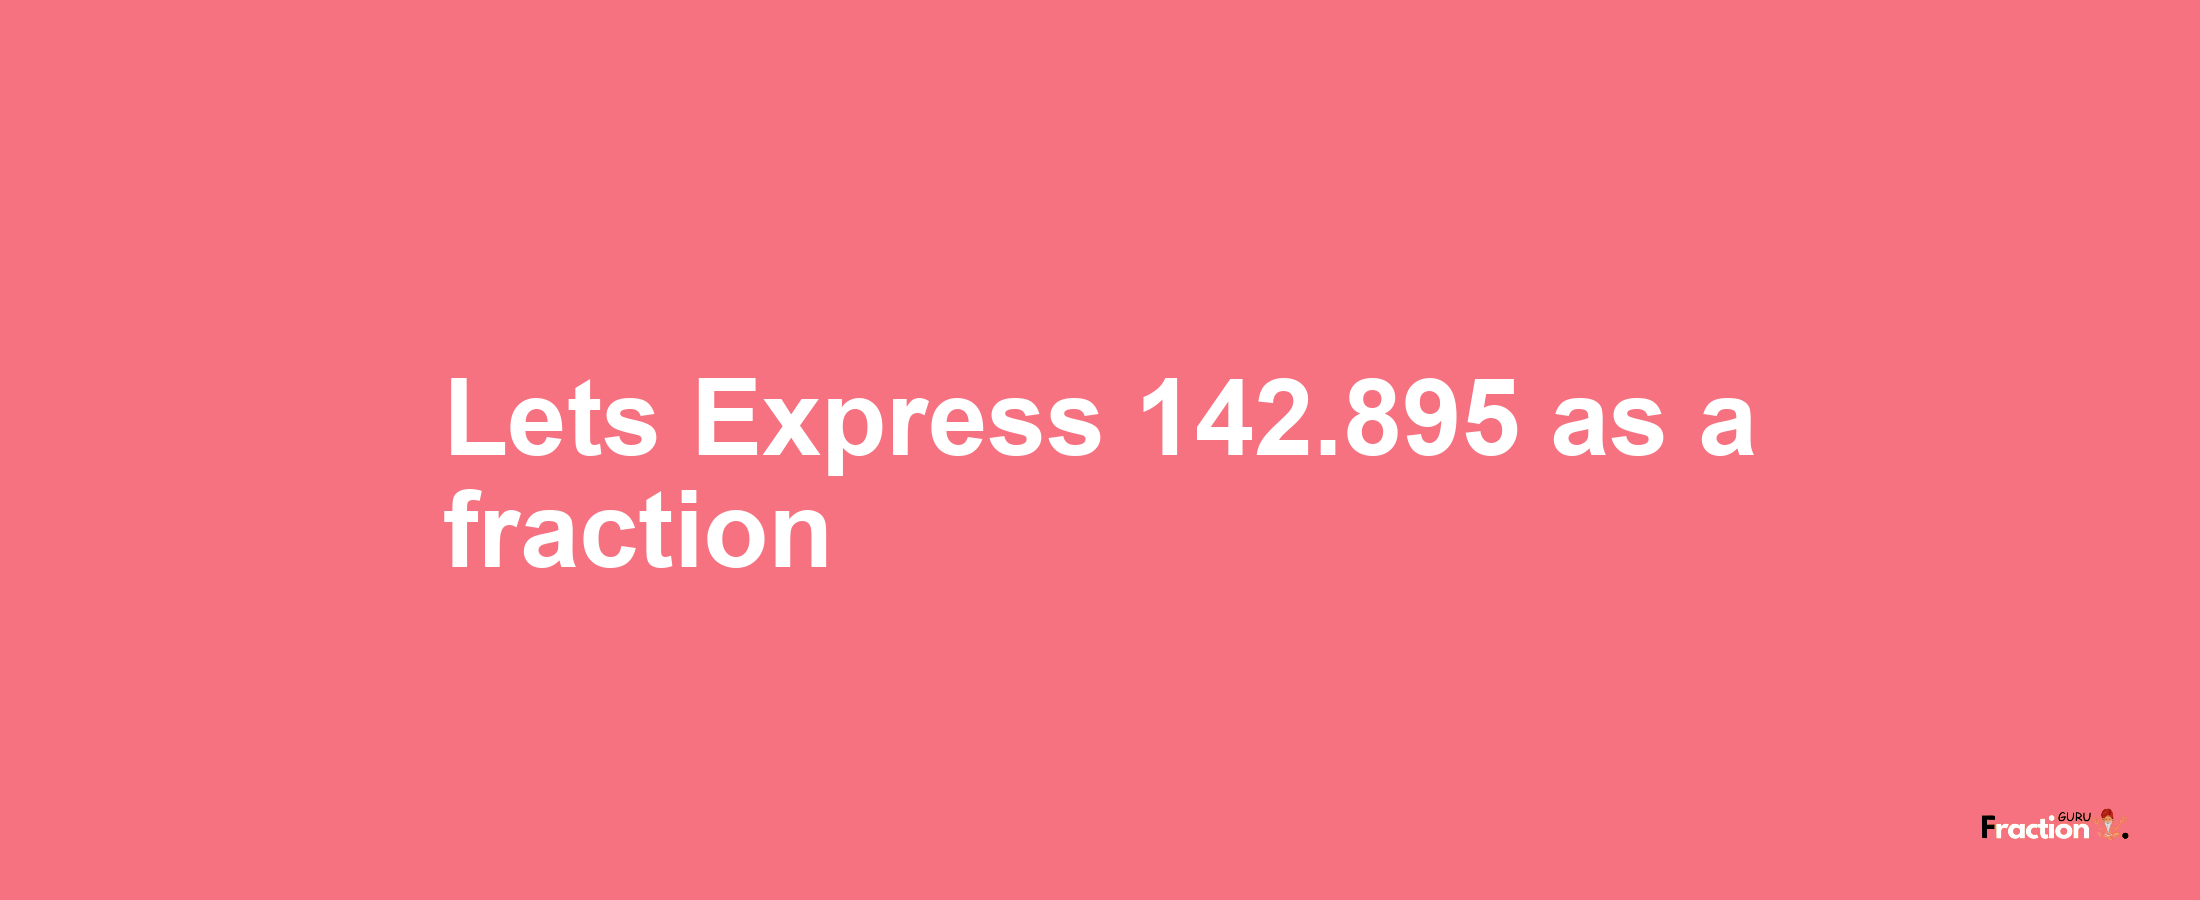 Lets Express 142.895 as afraction